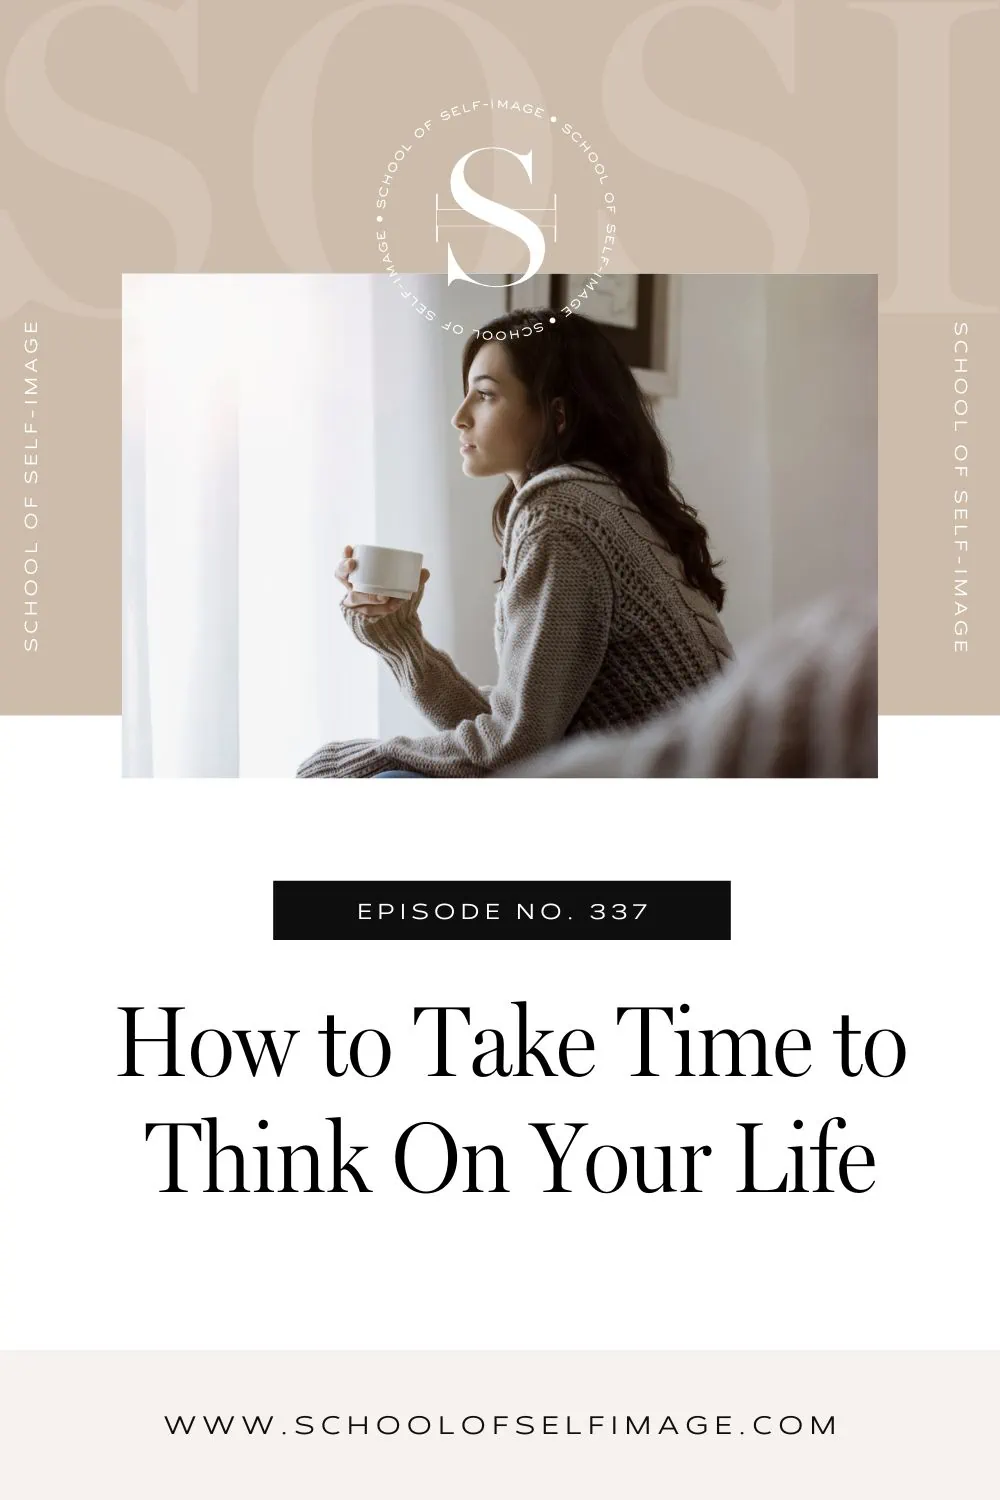 How to Take Time to Think On Your Life